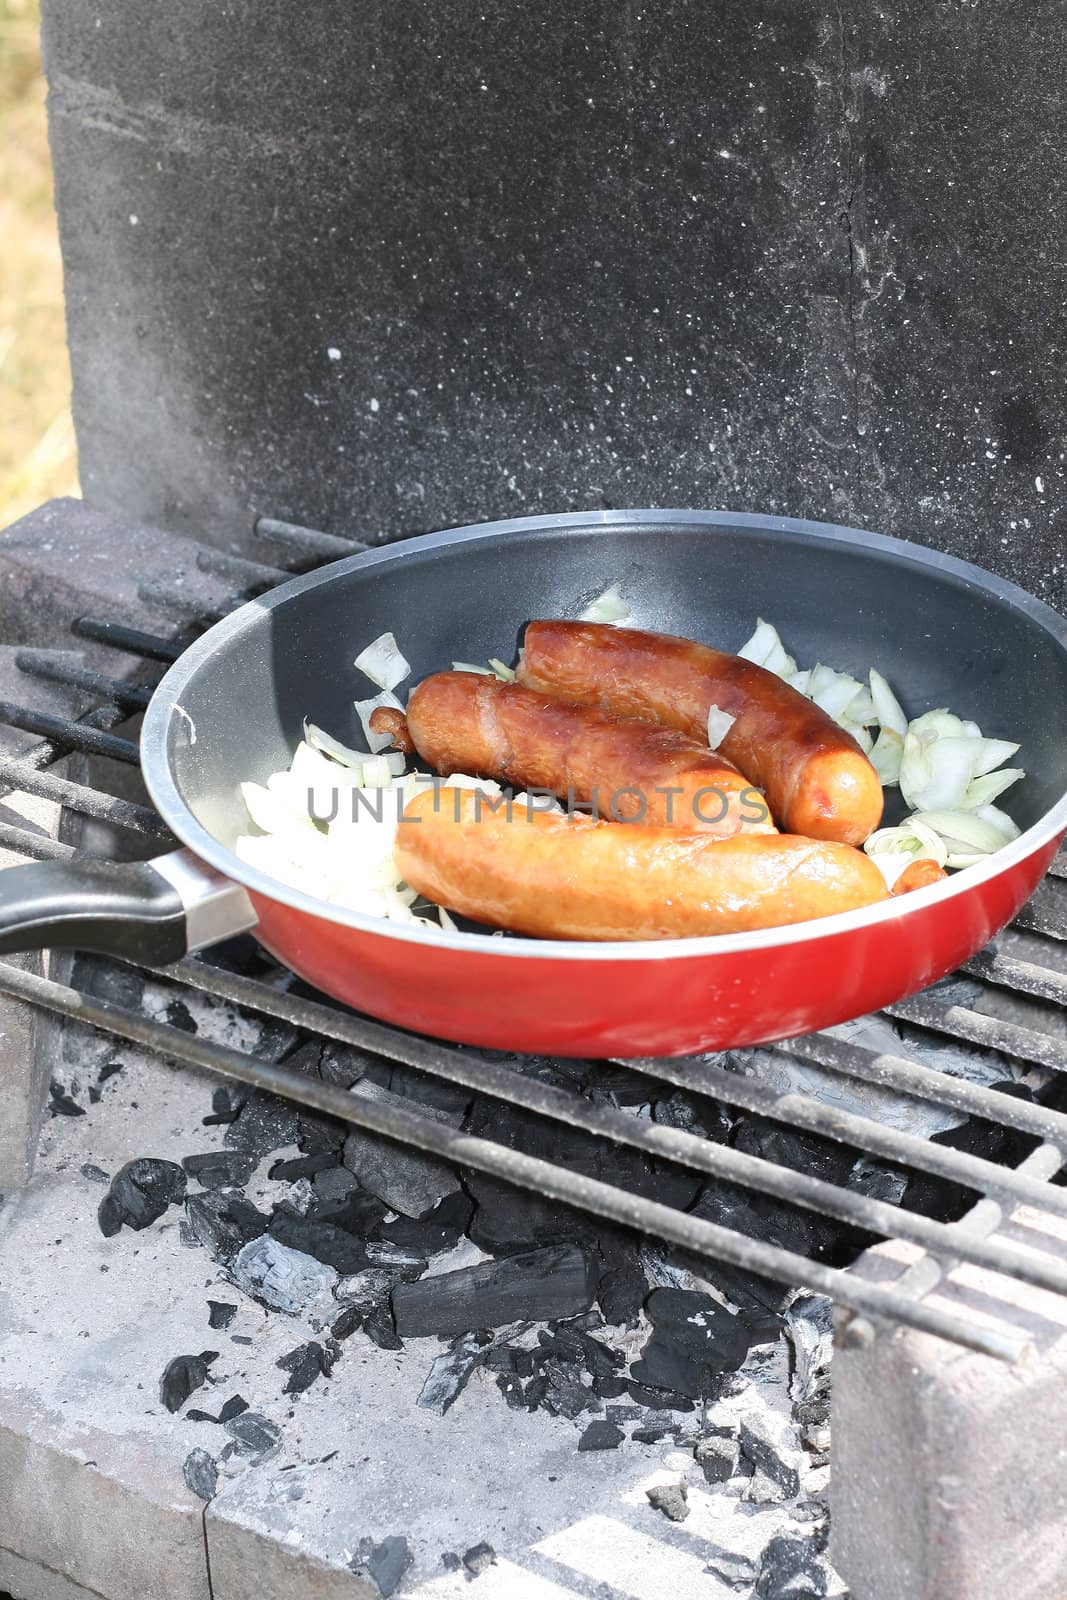 barbecue, sausage by miczu